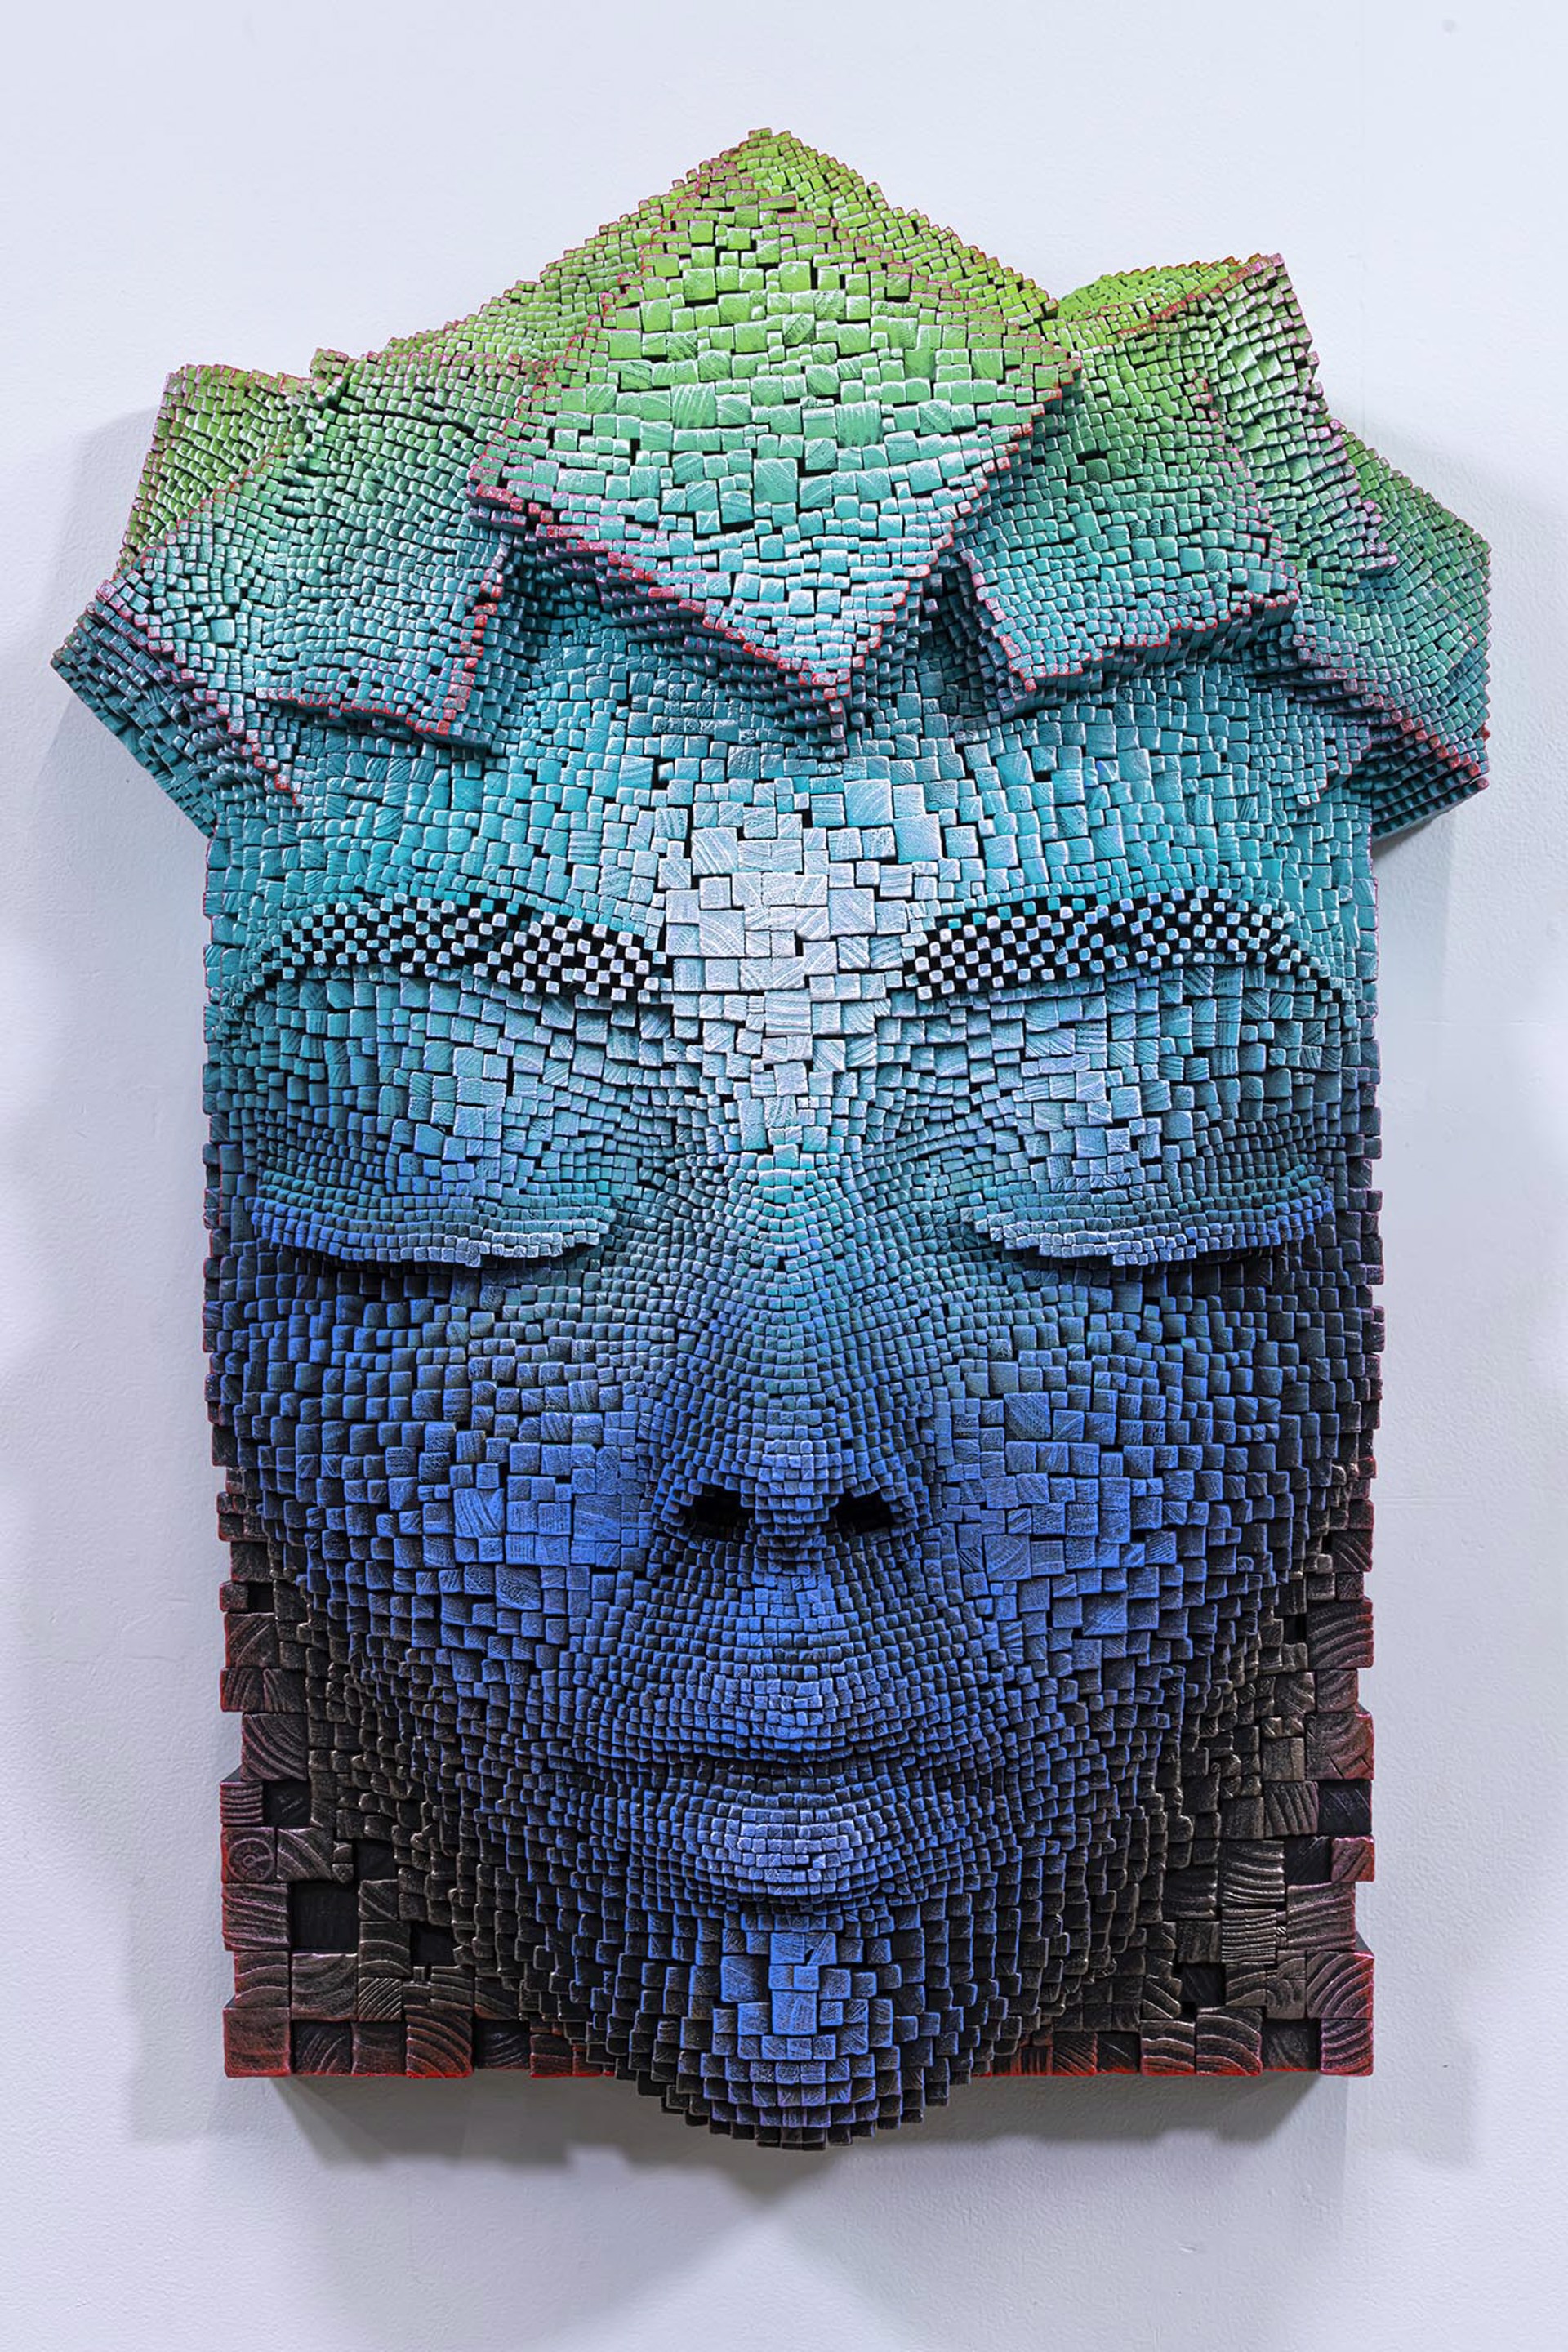 Cubist Mind by Gil Bruvel